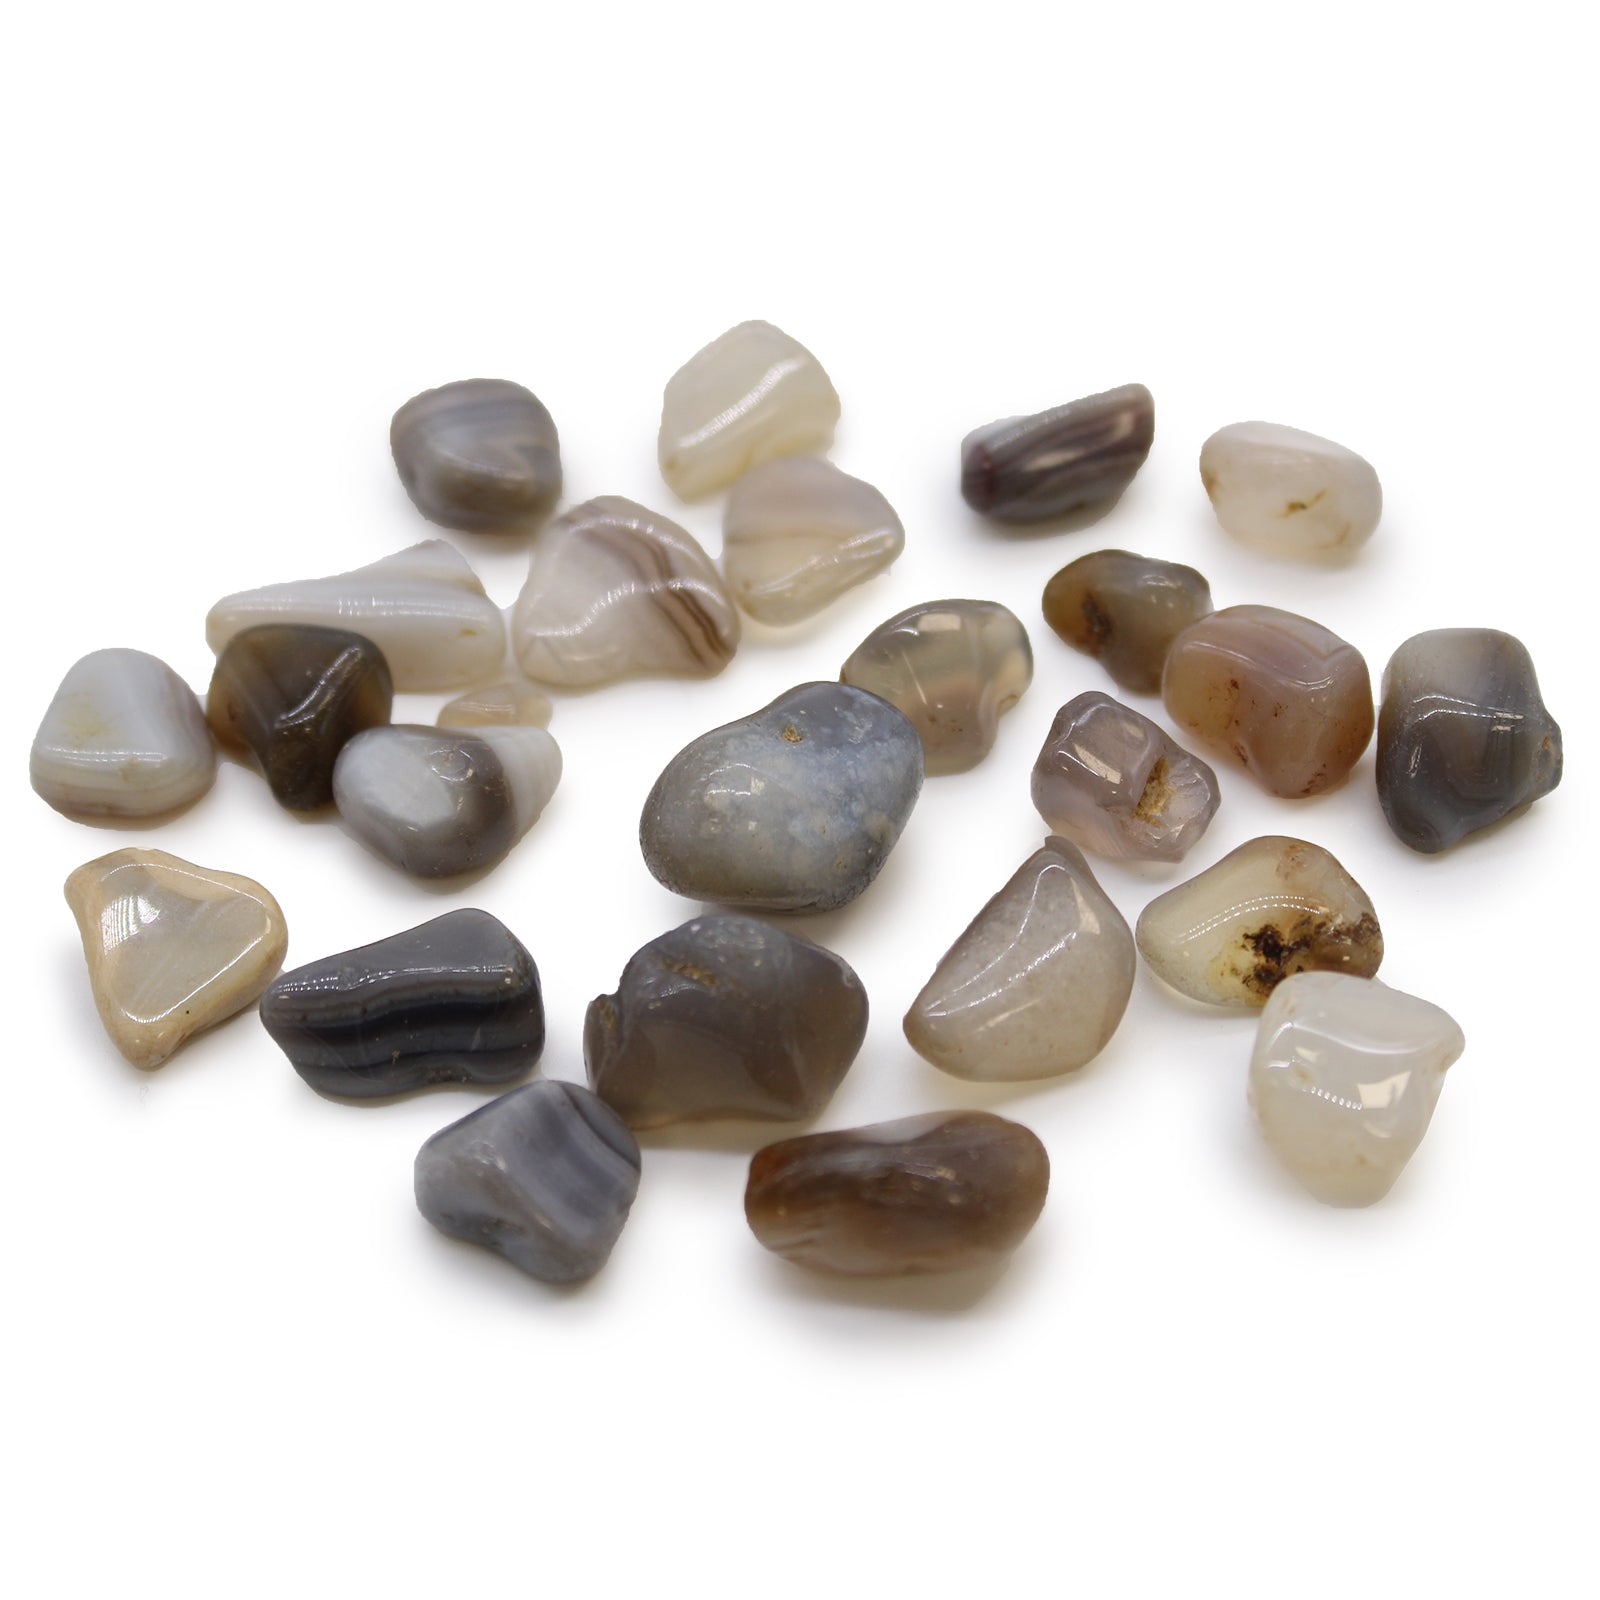 View Small African Tumble Stones Grey Agate Botswana information